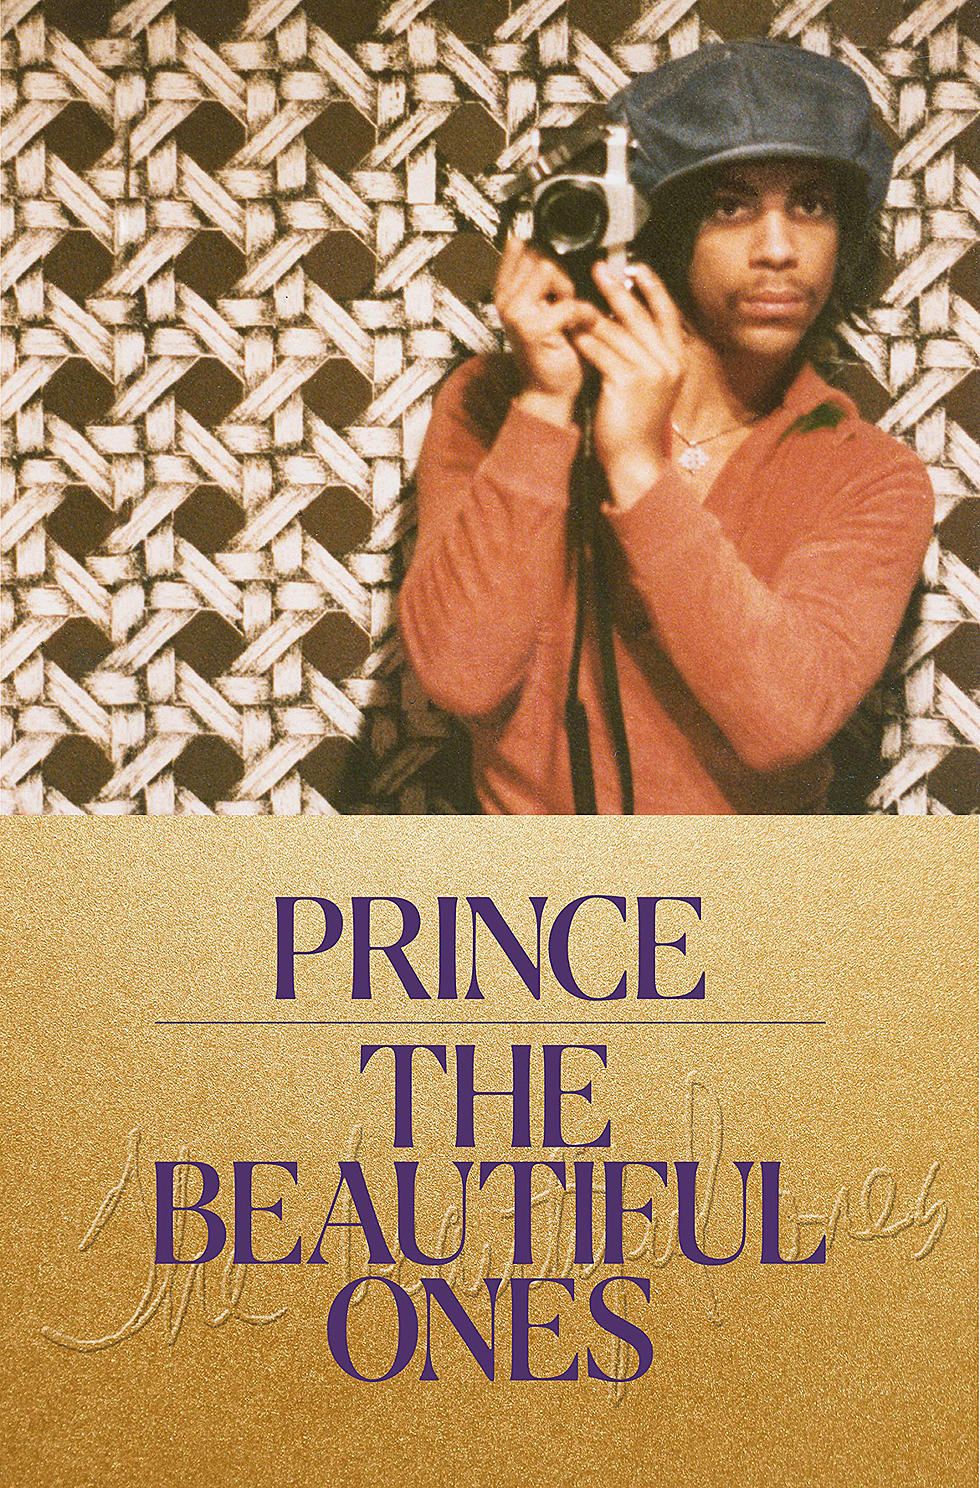 Listen to Excerpt from Prince’s ‘The Beautiful Ones’ Audio Book